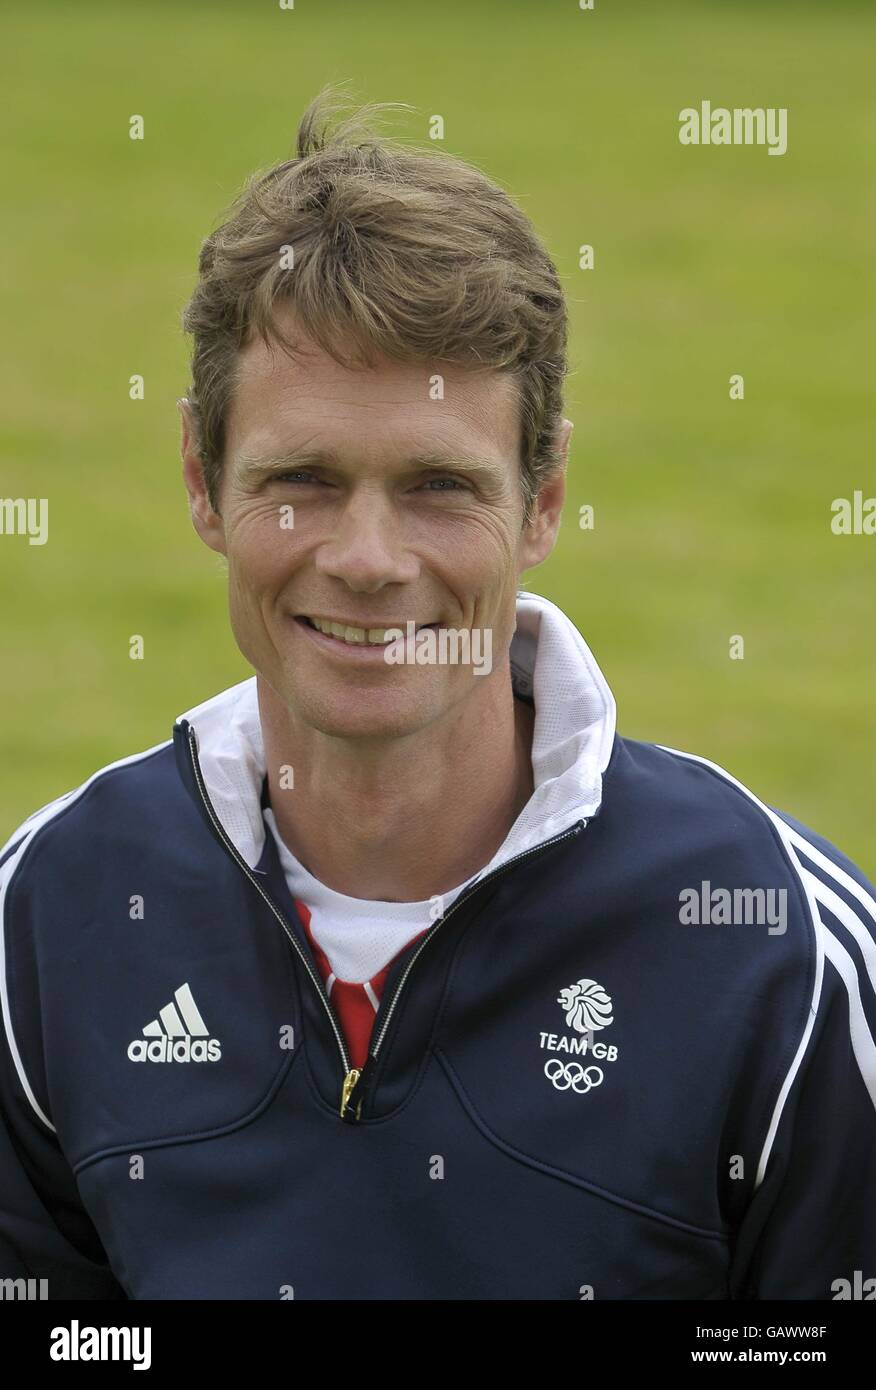 Chippenham, Wiltshire, UK. 05th July, 2016. William Fox-Pitt, age 47, based Dorset, with Christopher Stone’s Chilli Morning. TeamGB announce the equestrian team for the Rio2016 Olympics. The old bull pen. Chippenham. Wiltshire. UK. 05/07/2016. Credit:  Sport In Pictures/Alamy Live News Stock Photo